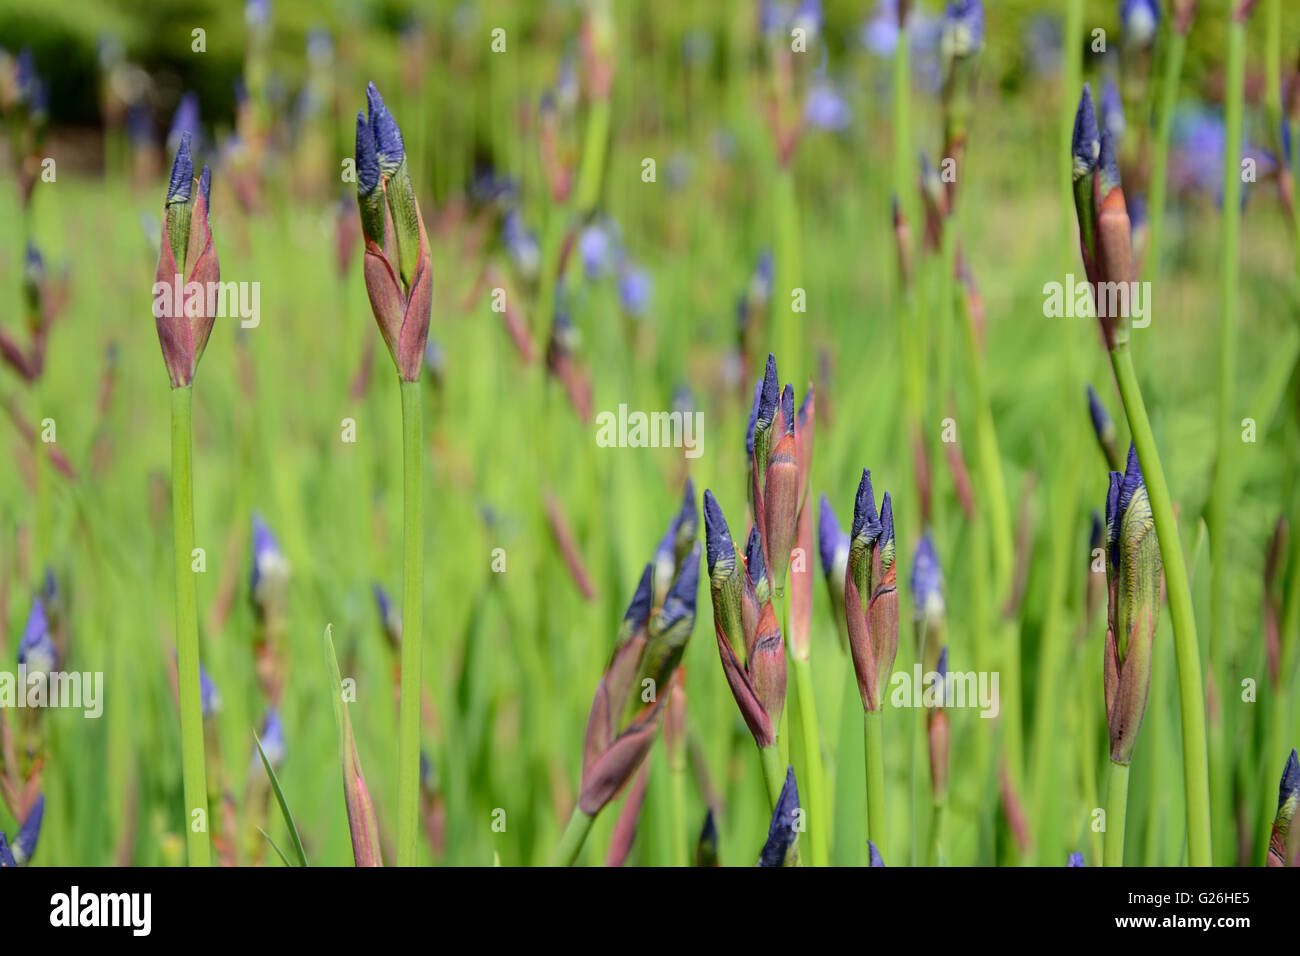 Buds of Iris blue flowers in garden close up Stock Photo